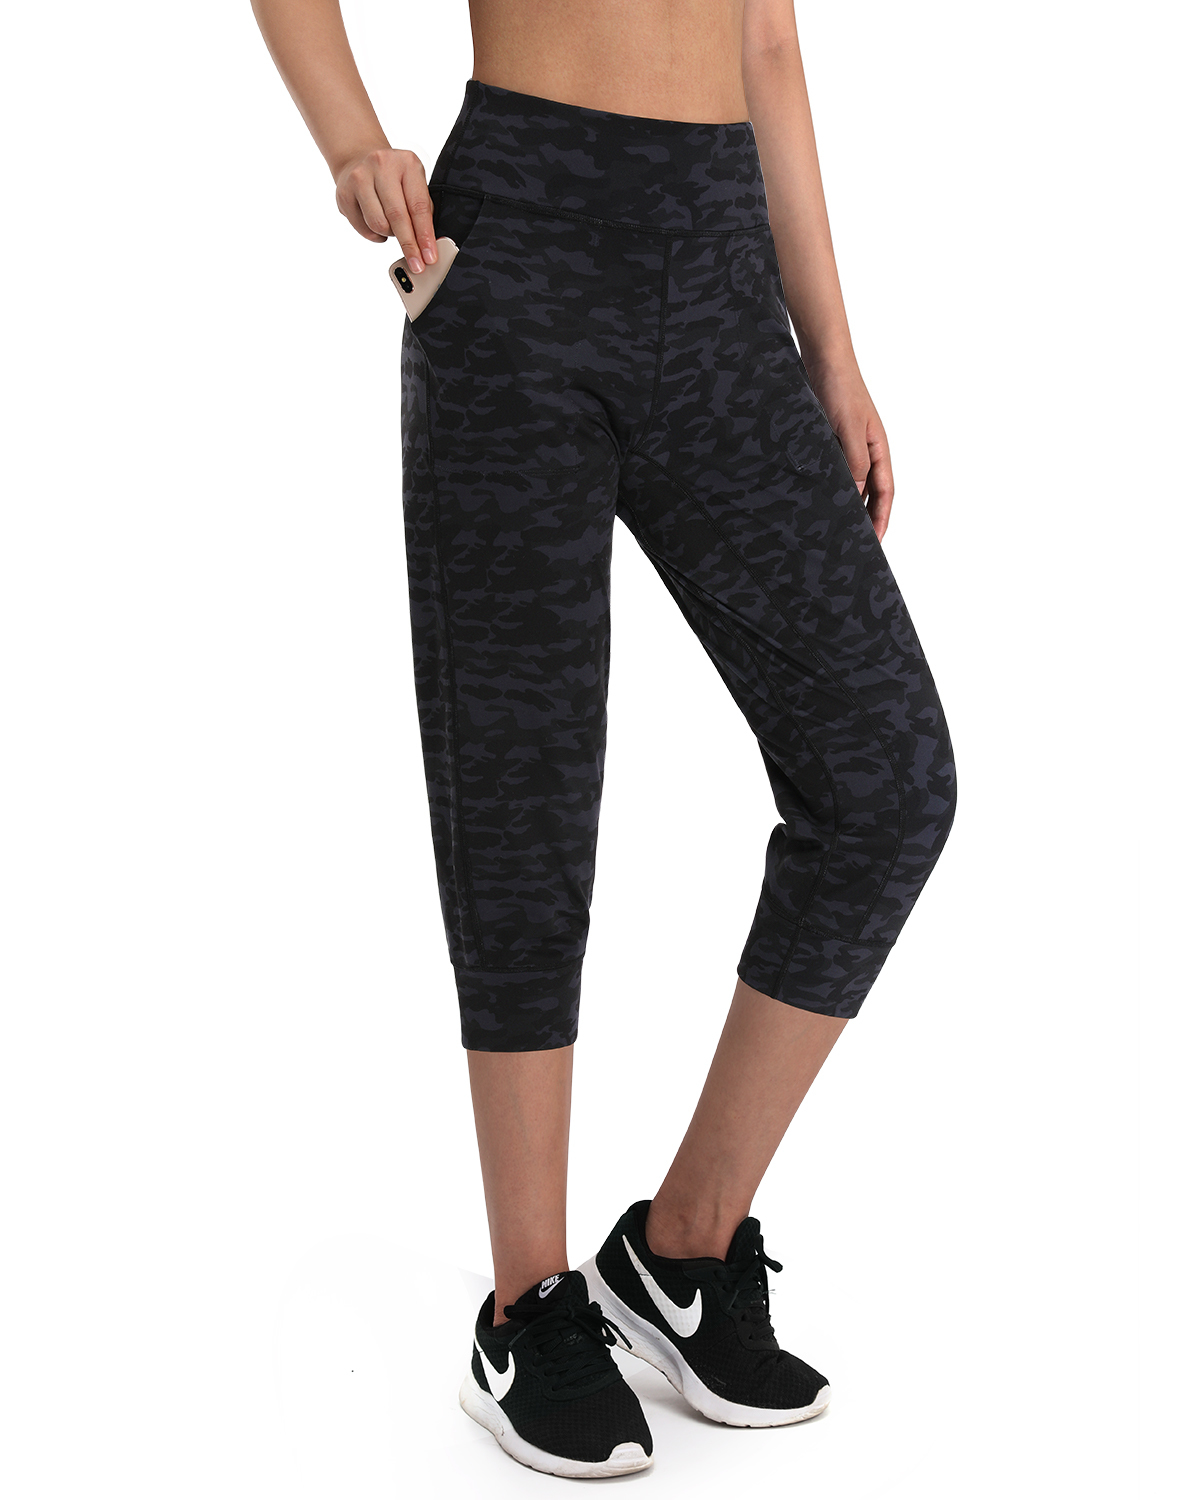 Promover Jogger Capris for Women Buttery Soft Workout Yoga Pants High ...